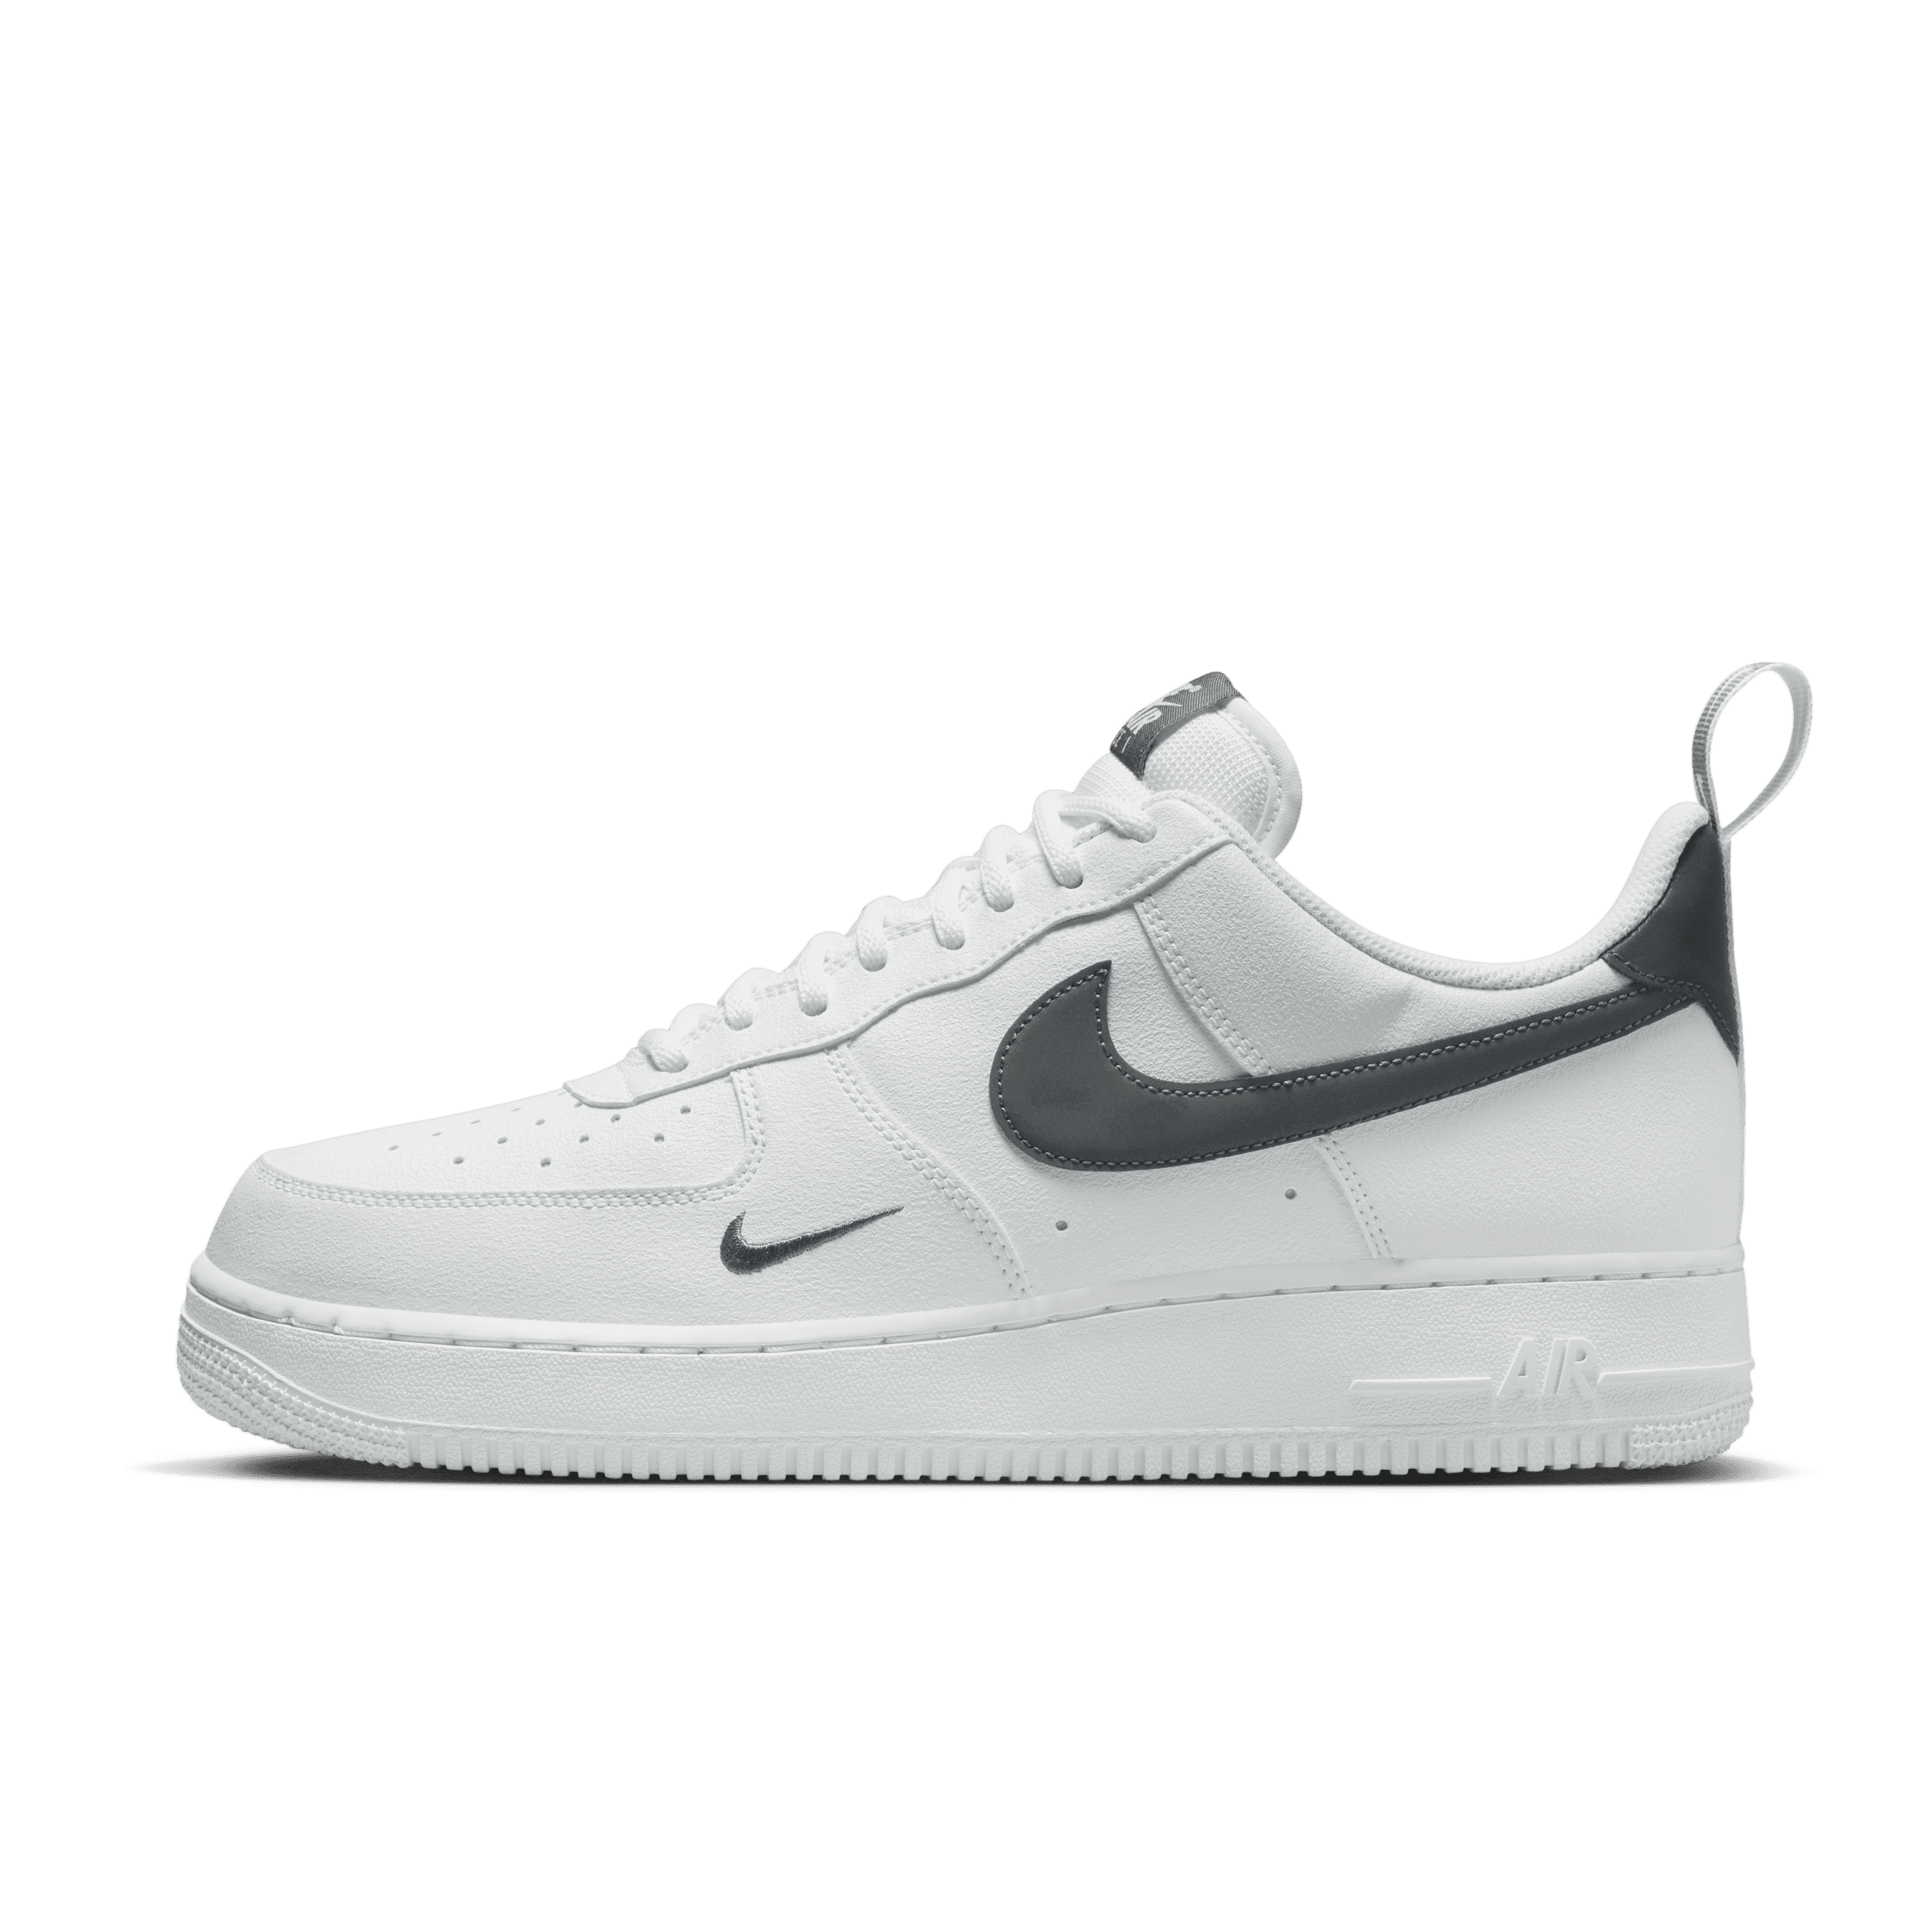 Nike Air Force 1 '07 LV8 'Test of Time' DO5876-100 US 9